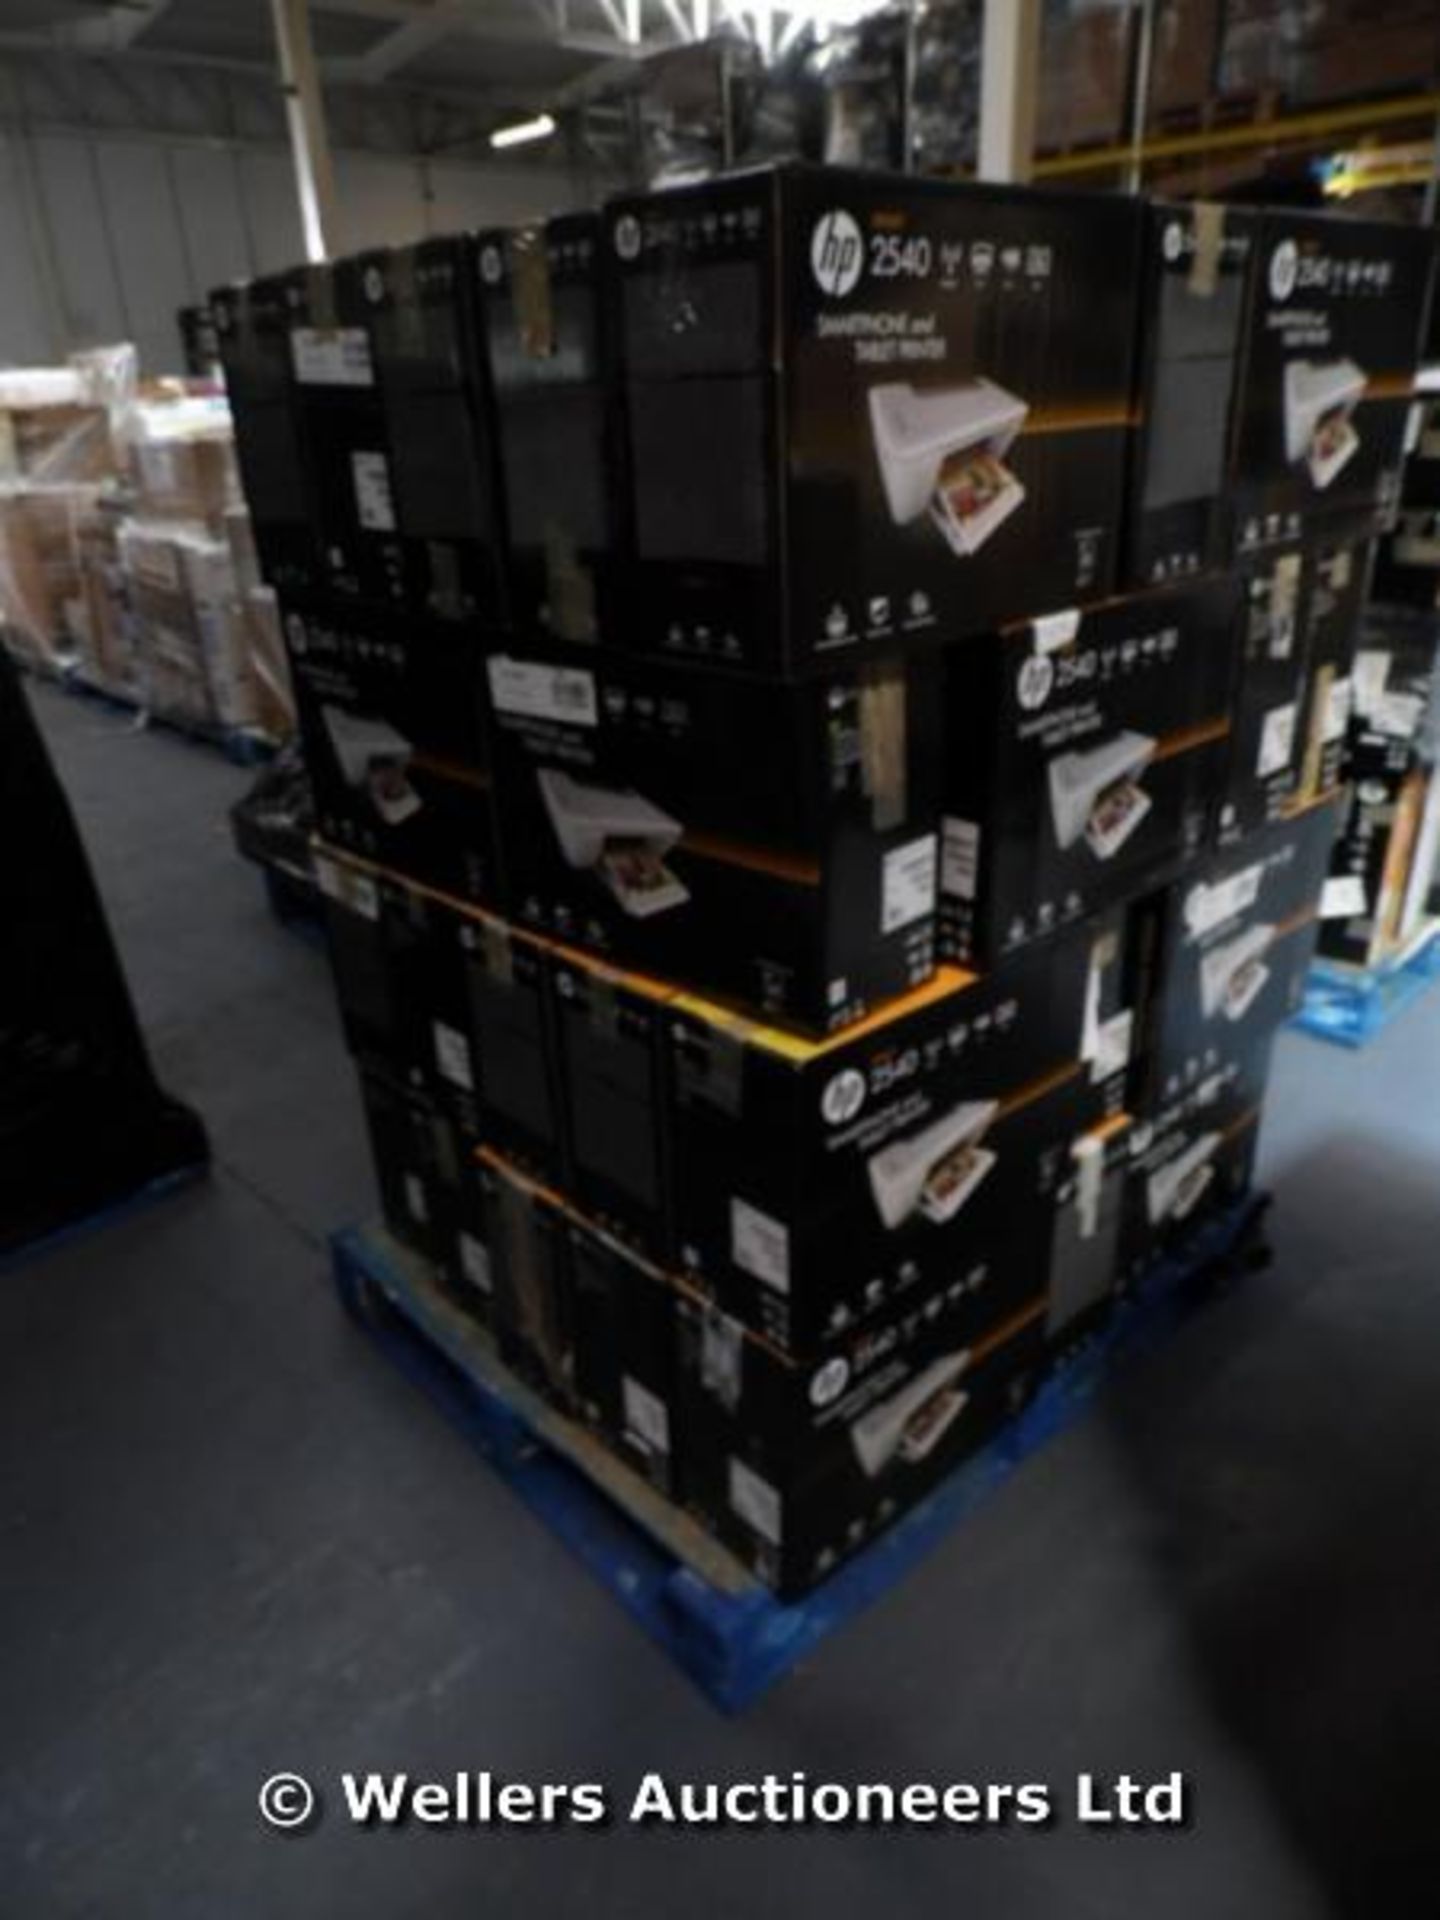 *1X MIXED PALLET OF APPROX 30X BOXED BEYOND ECONOMICAL REPAIR HP 2540 PRINTERS. (LOCATION